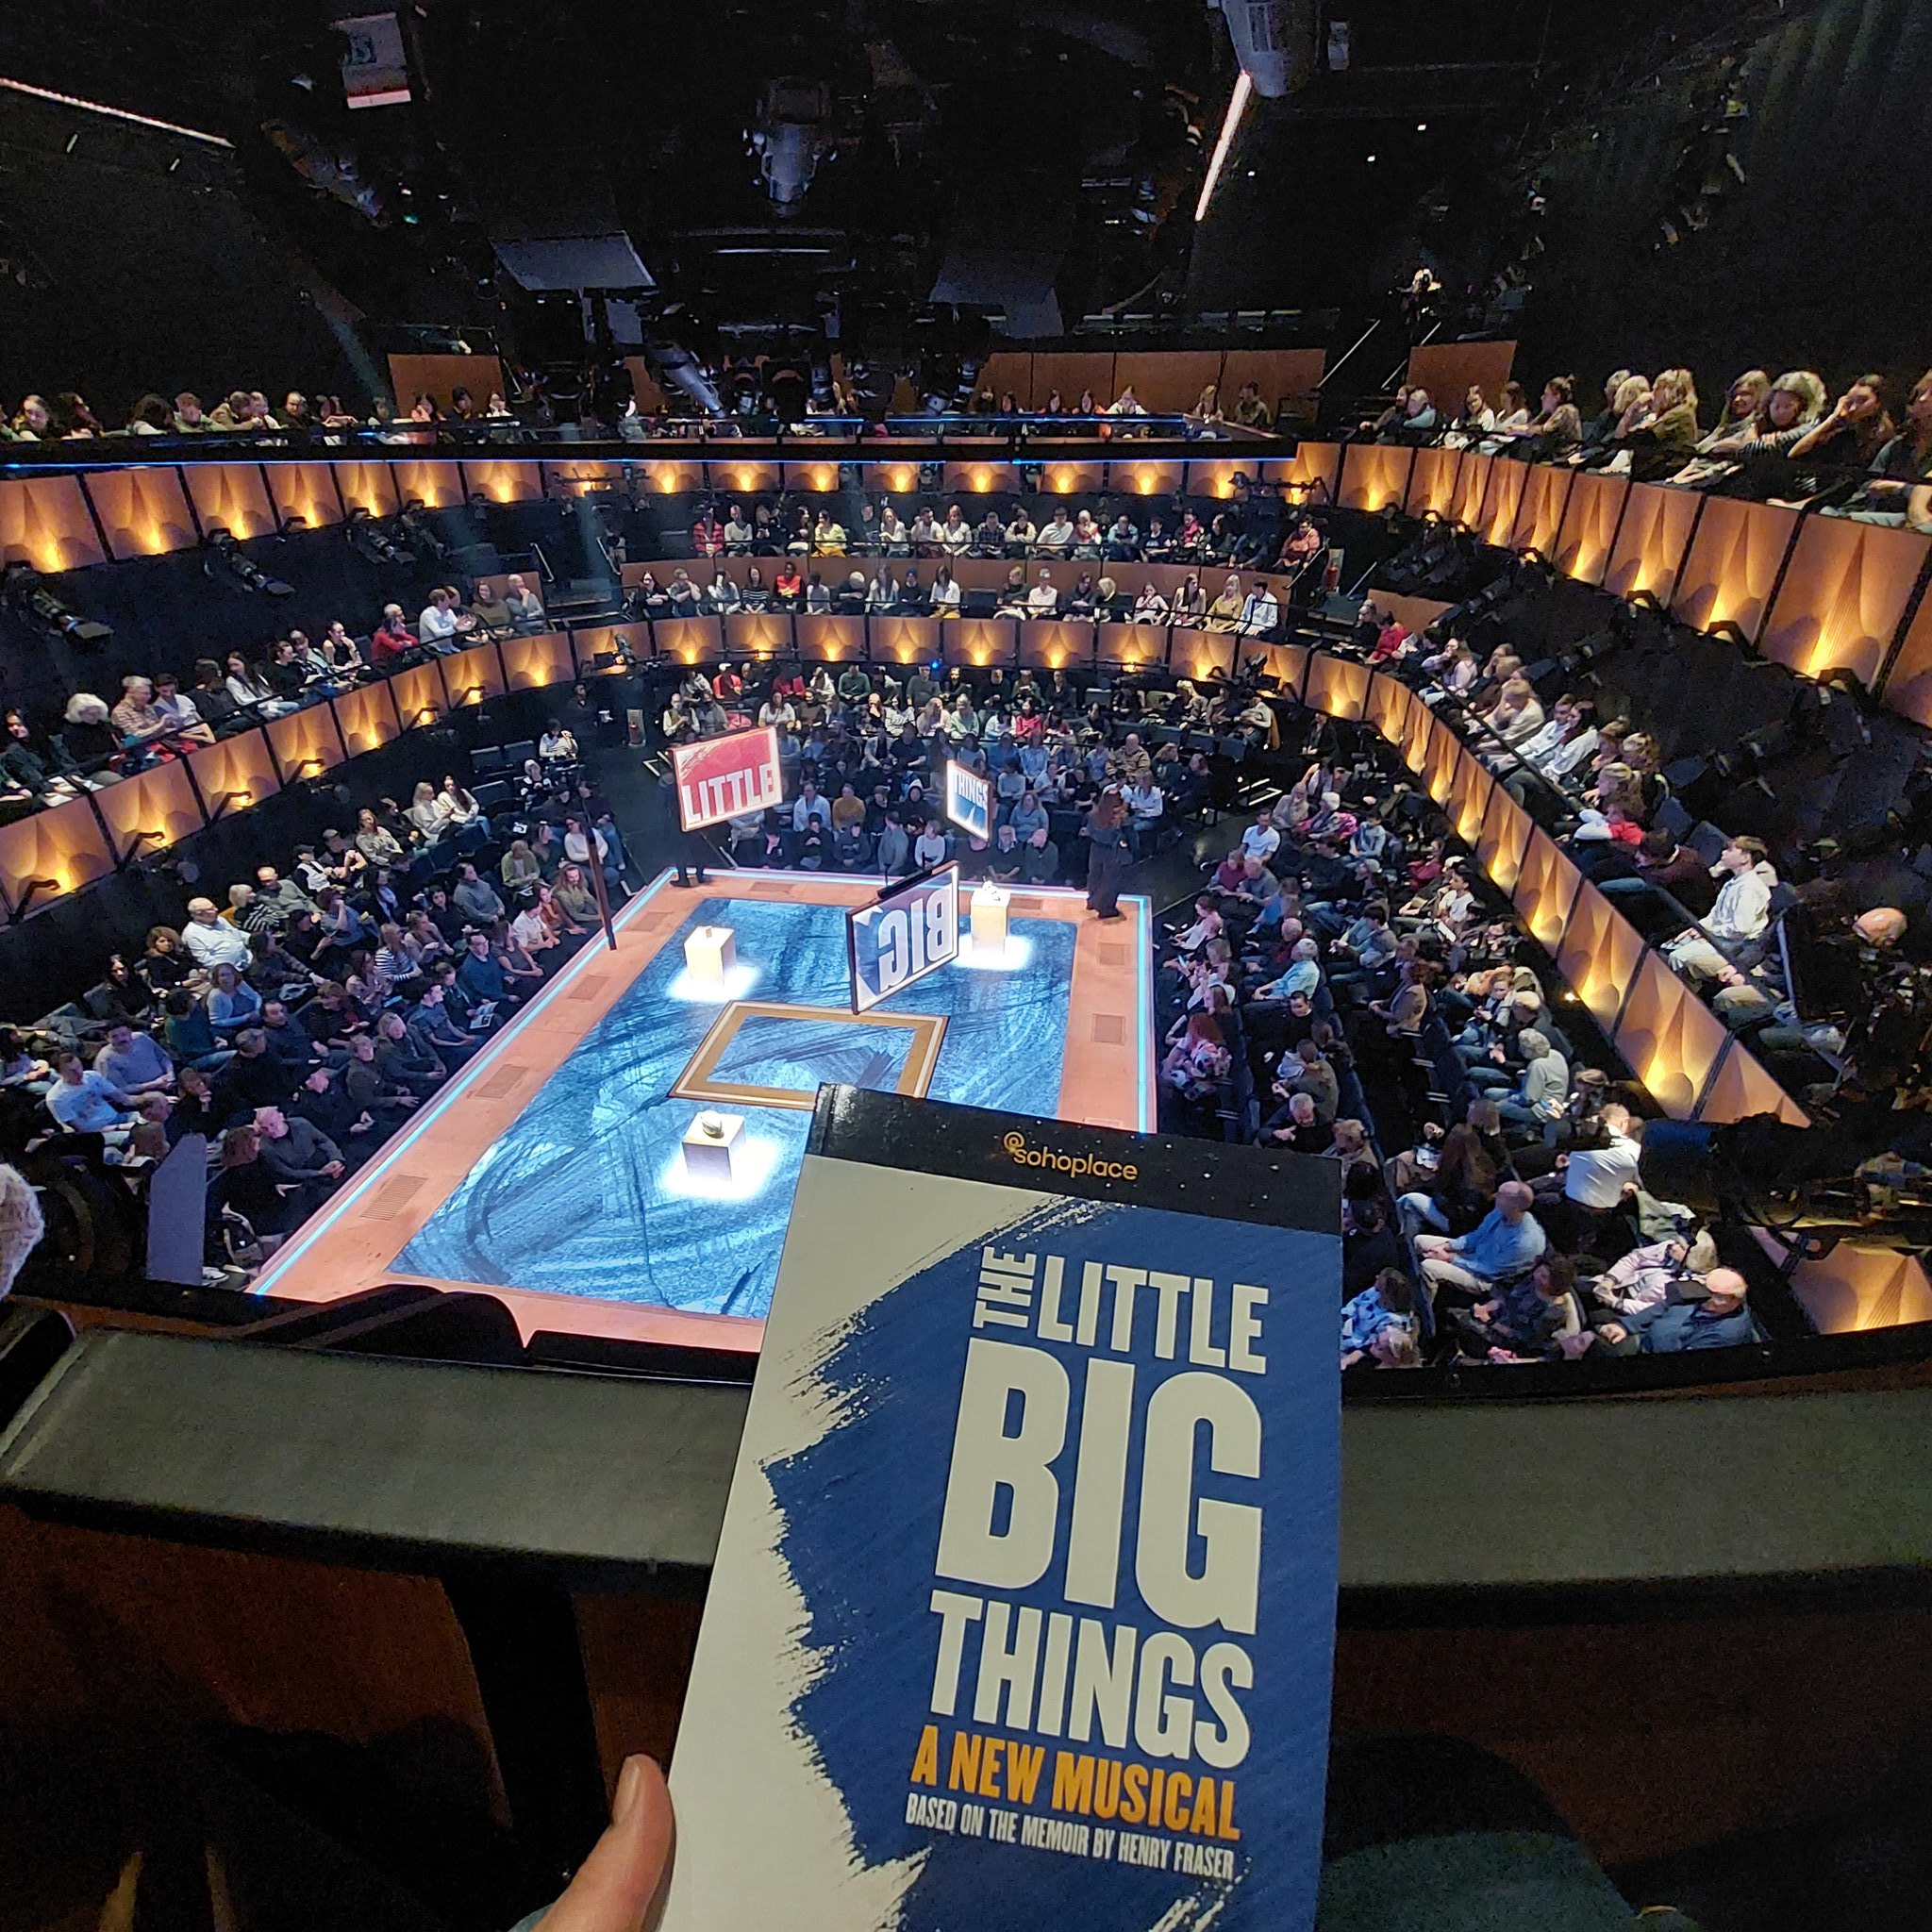 The Little Big Things: A New Musical (@TLBTmusical) / X